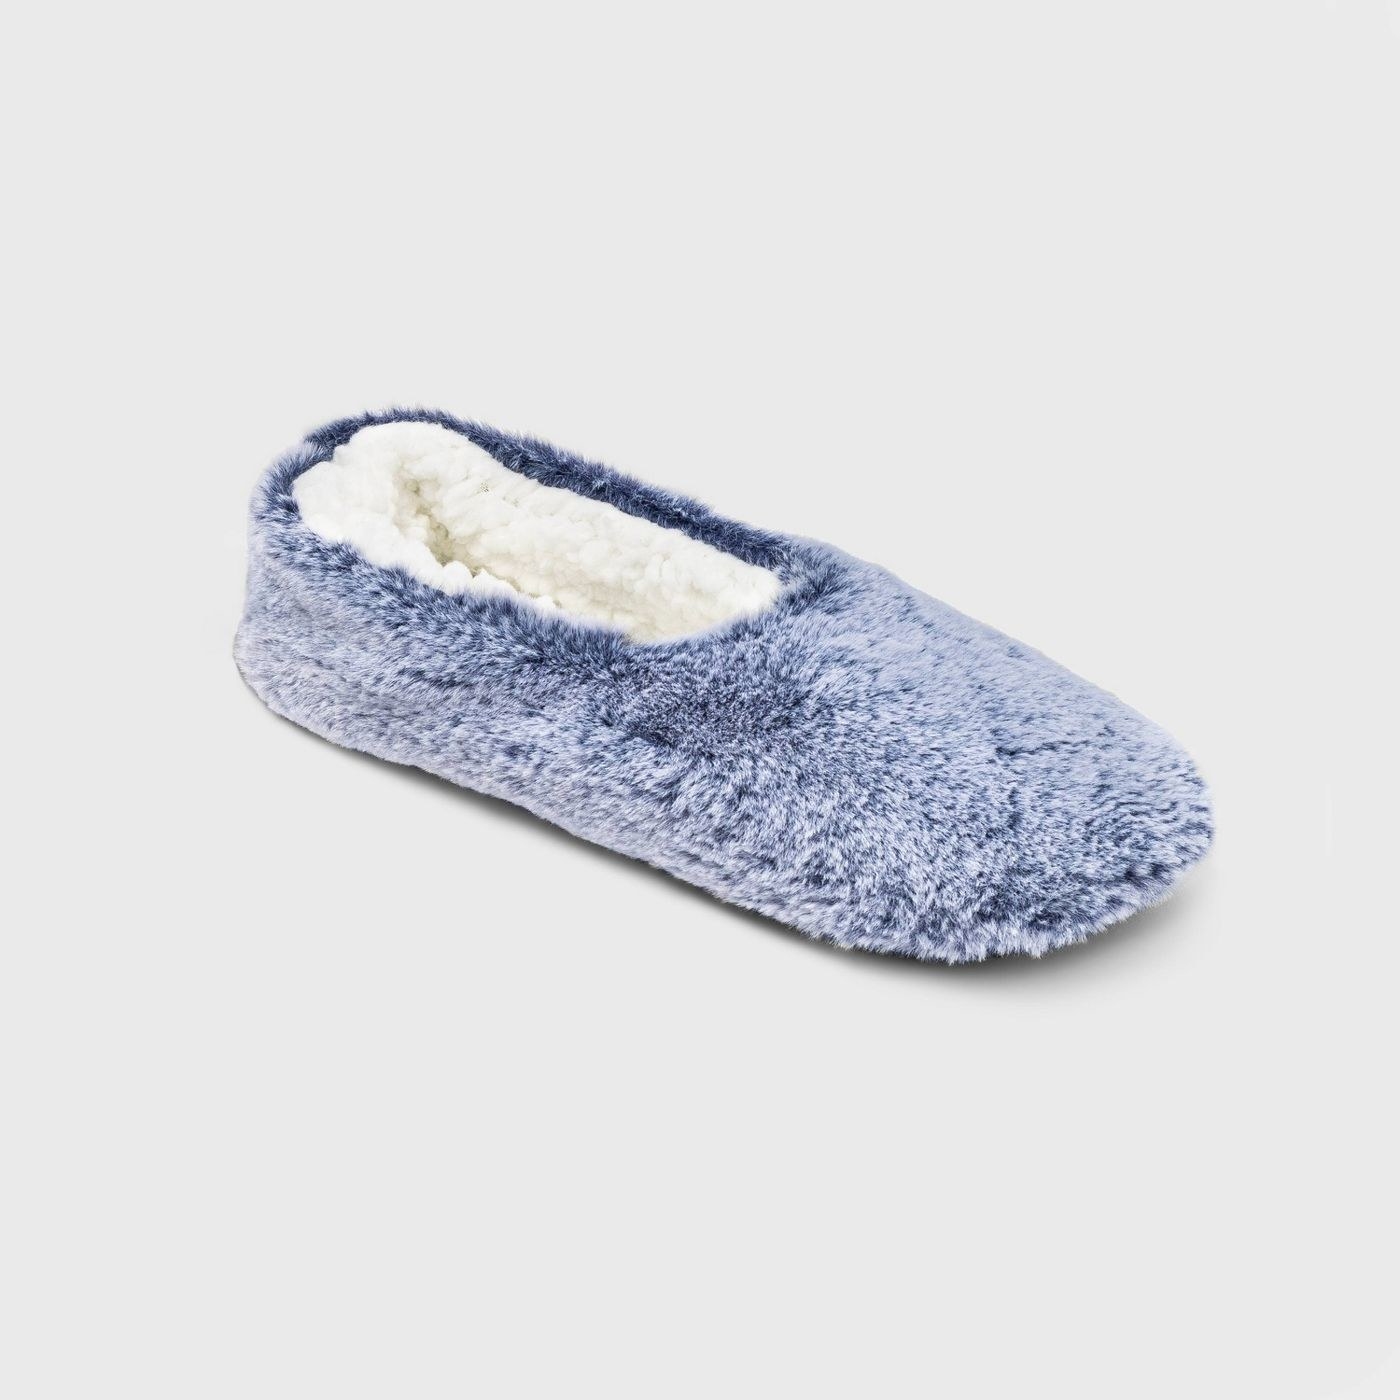 A blue cozy slipper sock with white fluffy insides